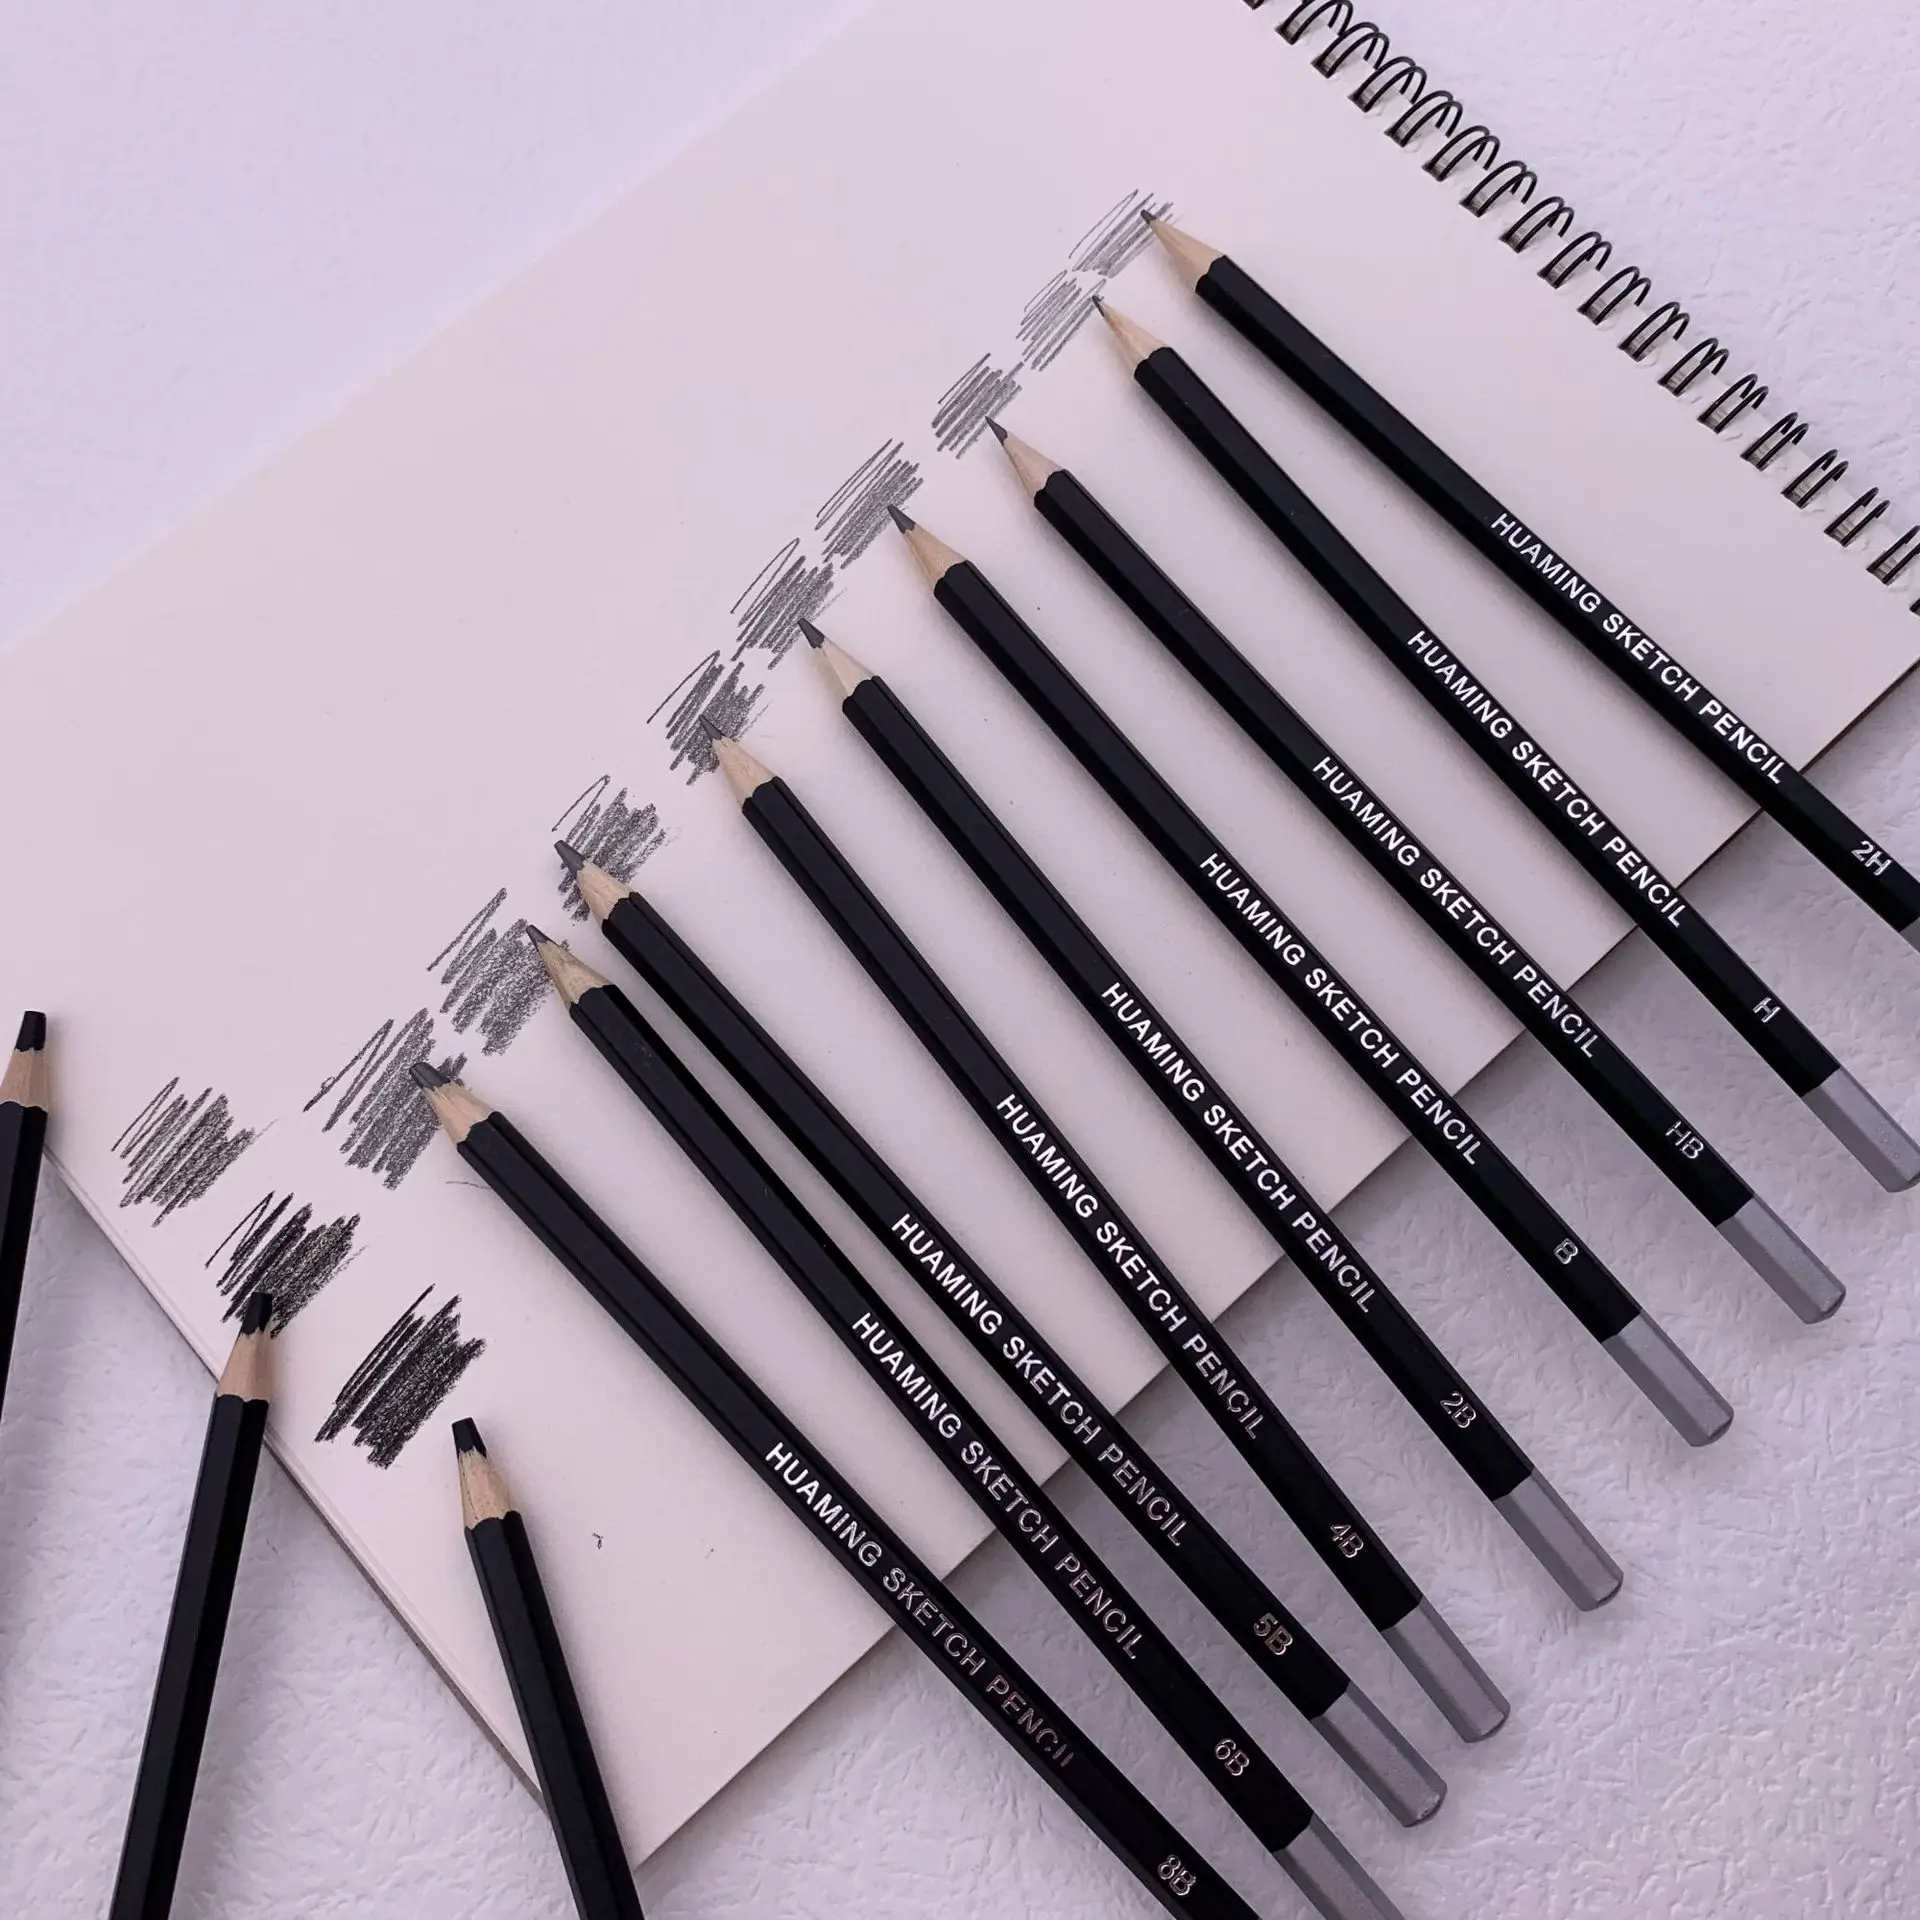 12PCS Sketch Charcoal Soft/medium/hard. Sketch Pencil Art student Special Hand-painted HB Painting Drawing Exam Pen 3pcs marco sketch painting white highlight pen charcoal pencil soft medium hard charcoal art student hand painted sketching pen